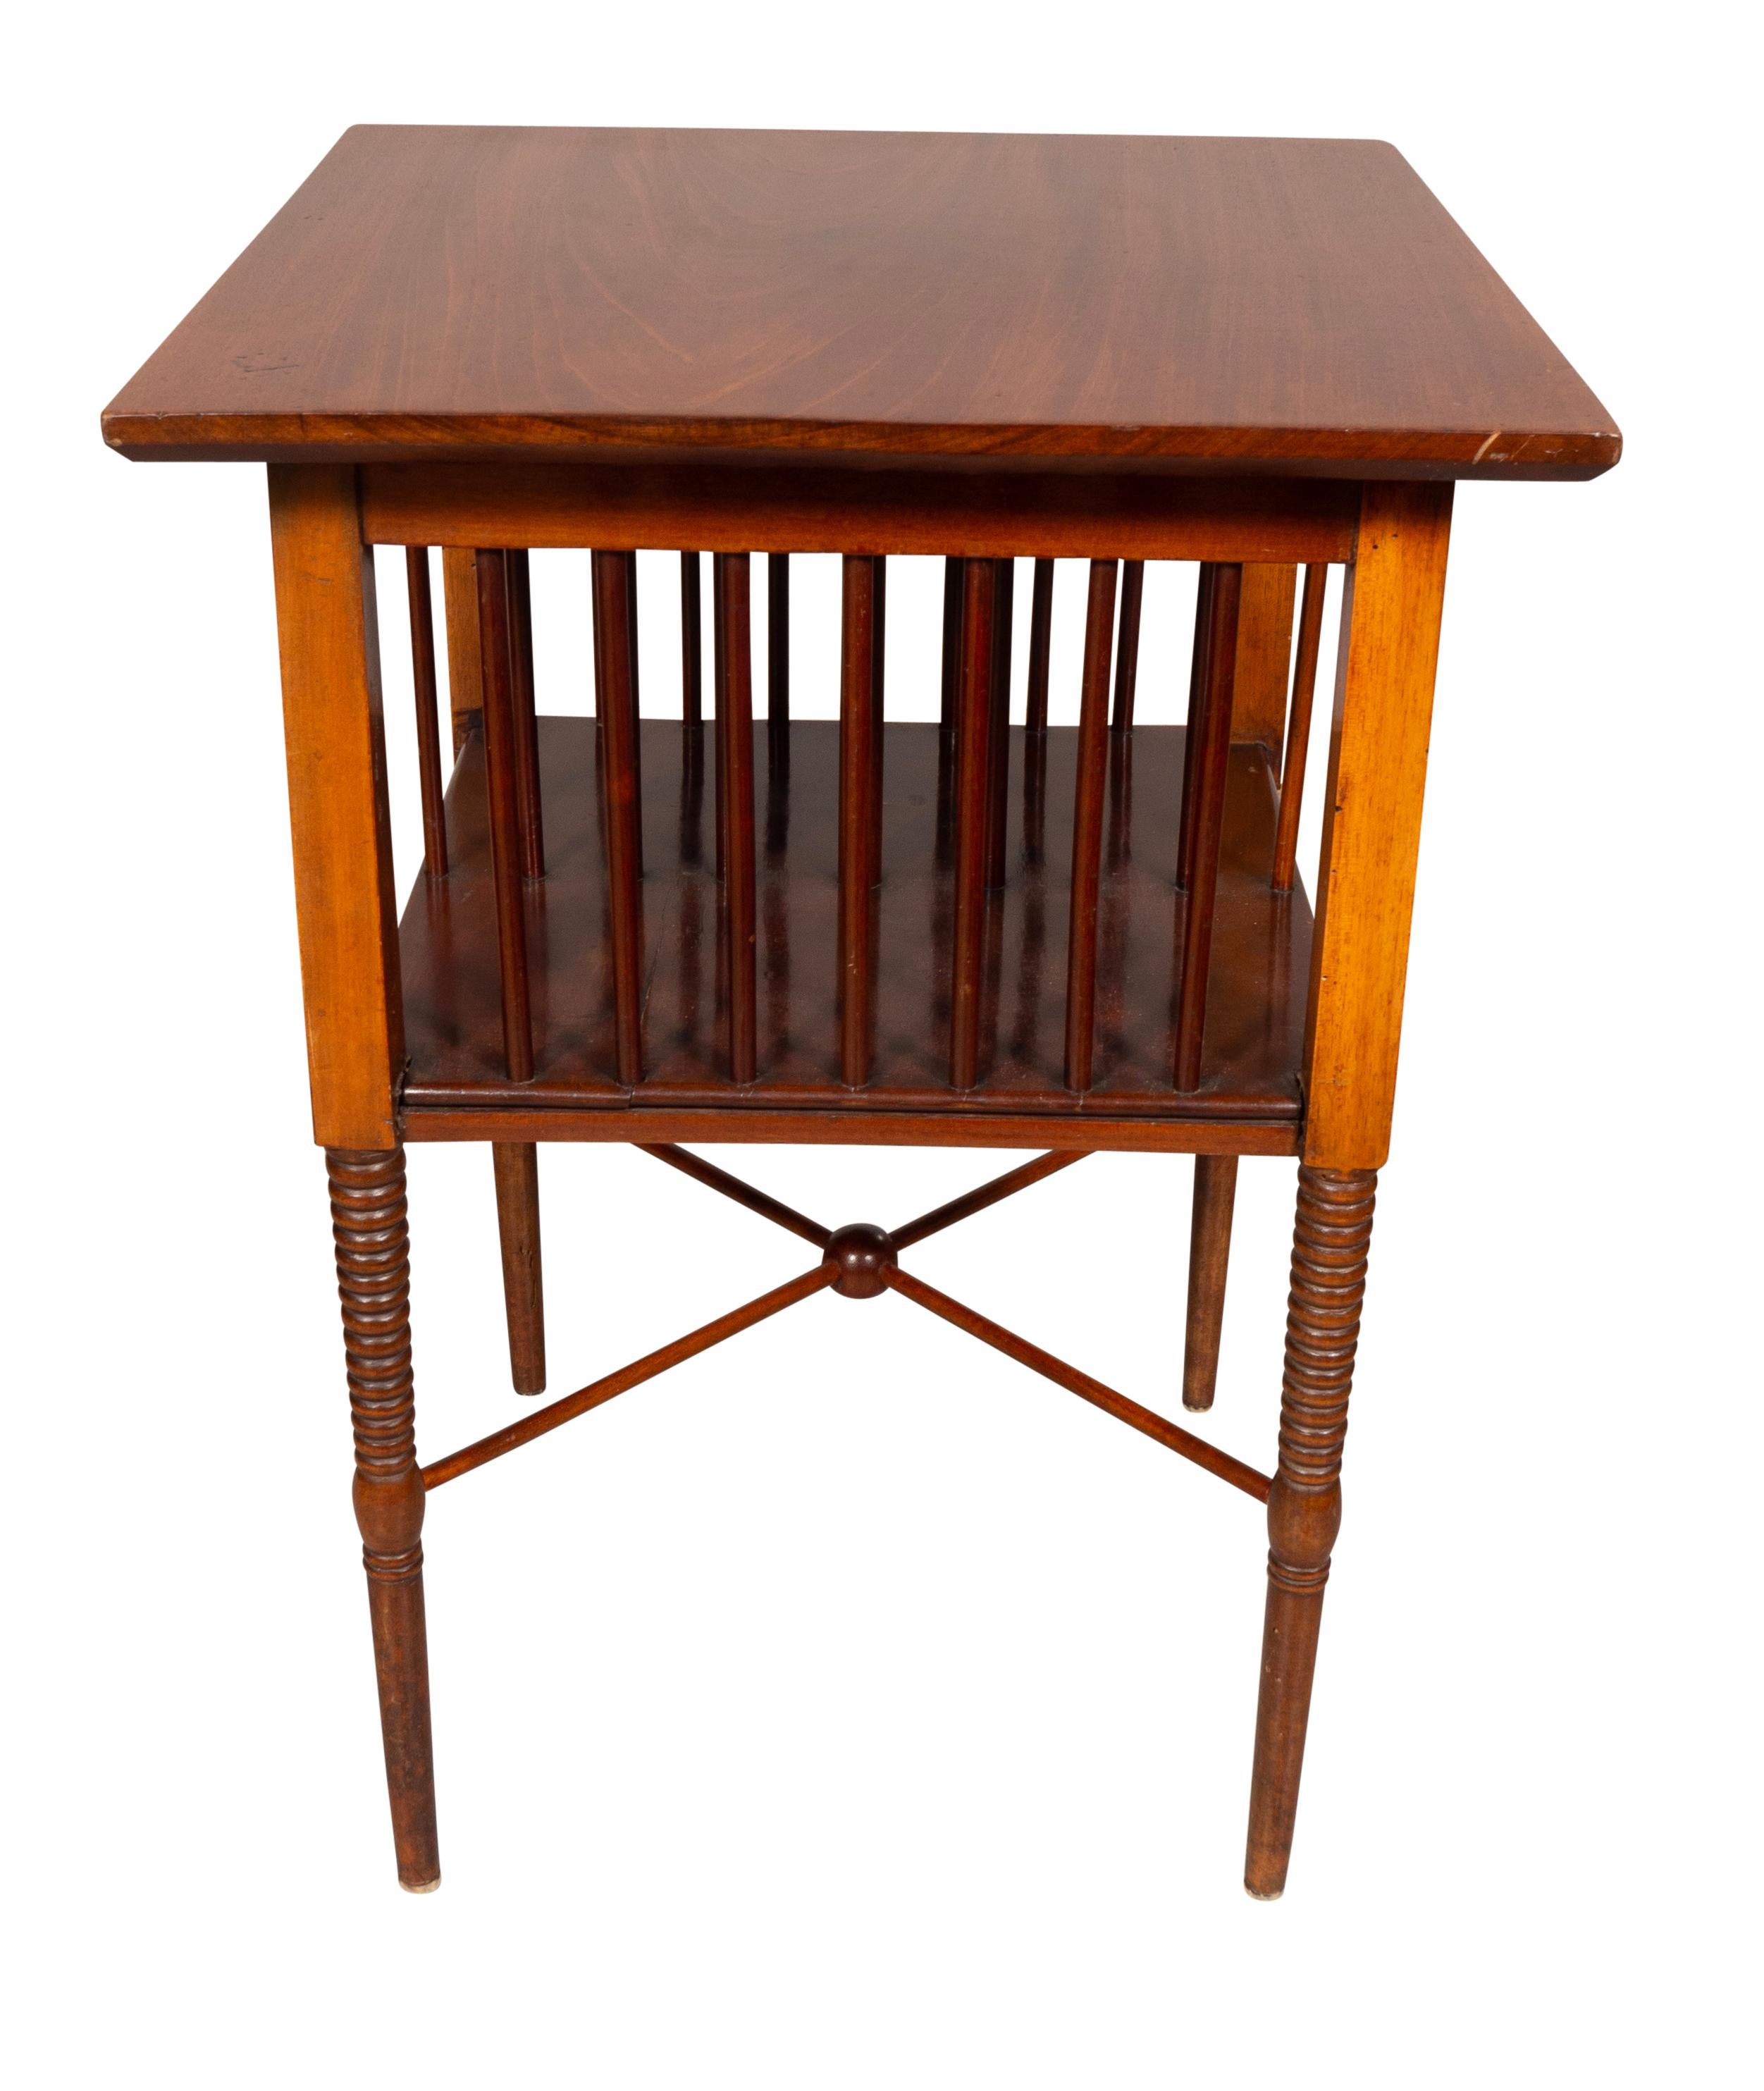 Late 19th Century English Aesthetic Mahogany Table Attributed To Godwin For Sale